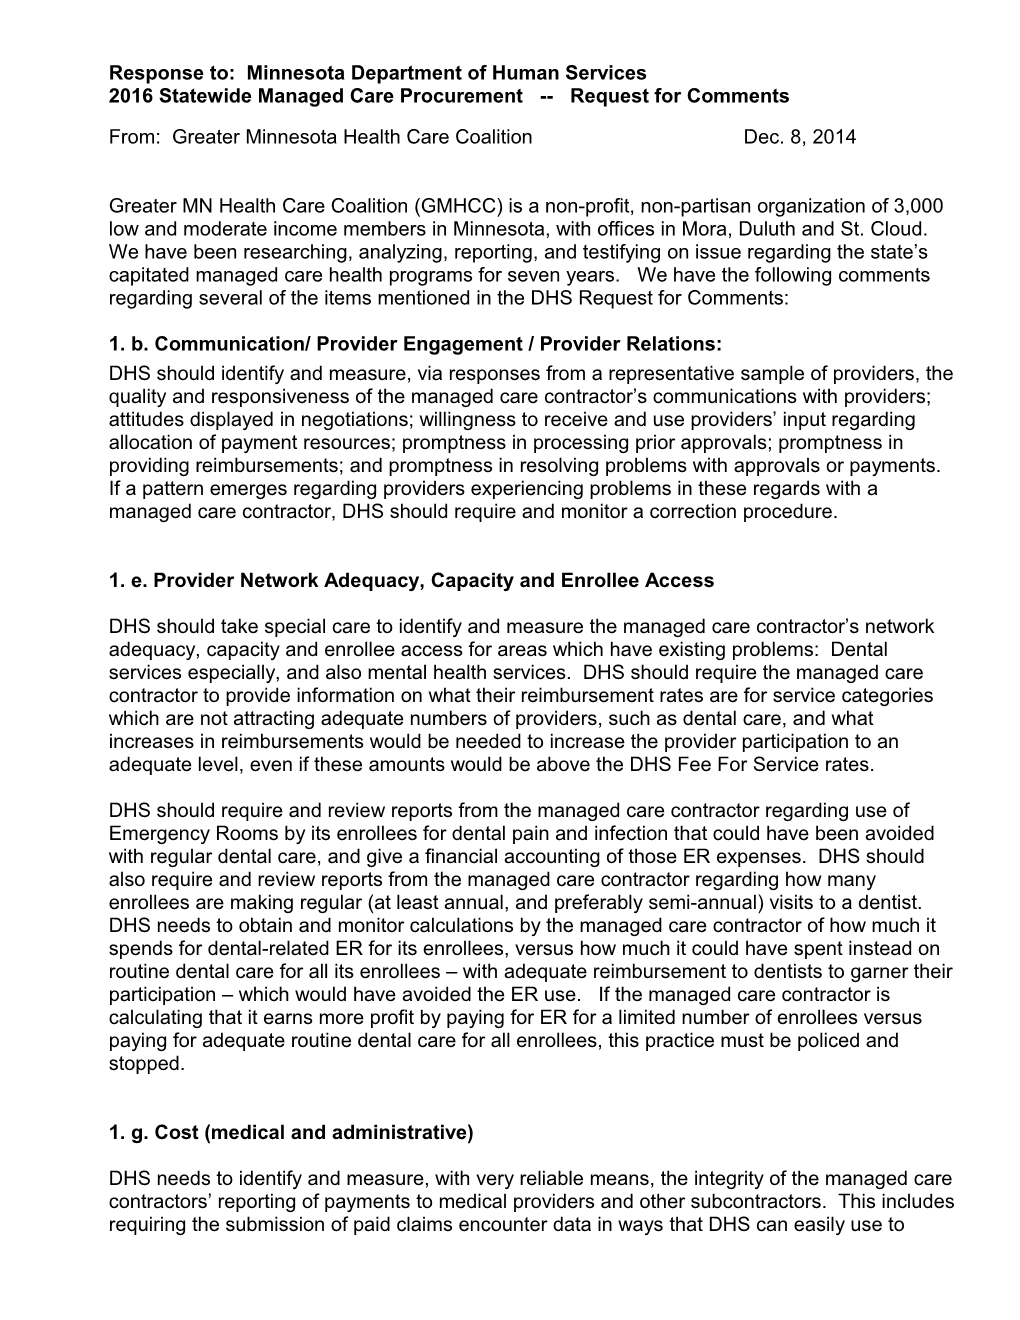 Response To: Minnesota Department of Human Services 2016 Statewide Managed Care Procurement